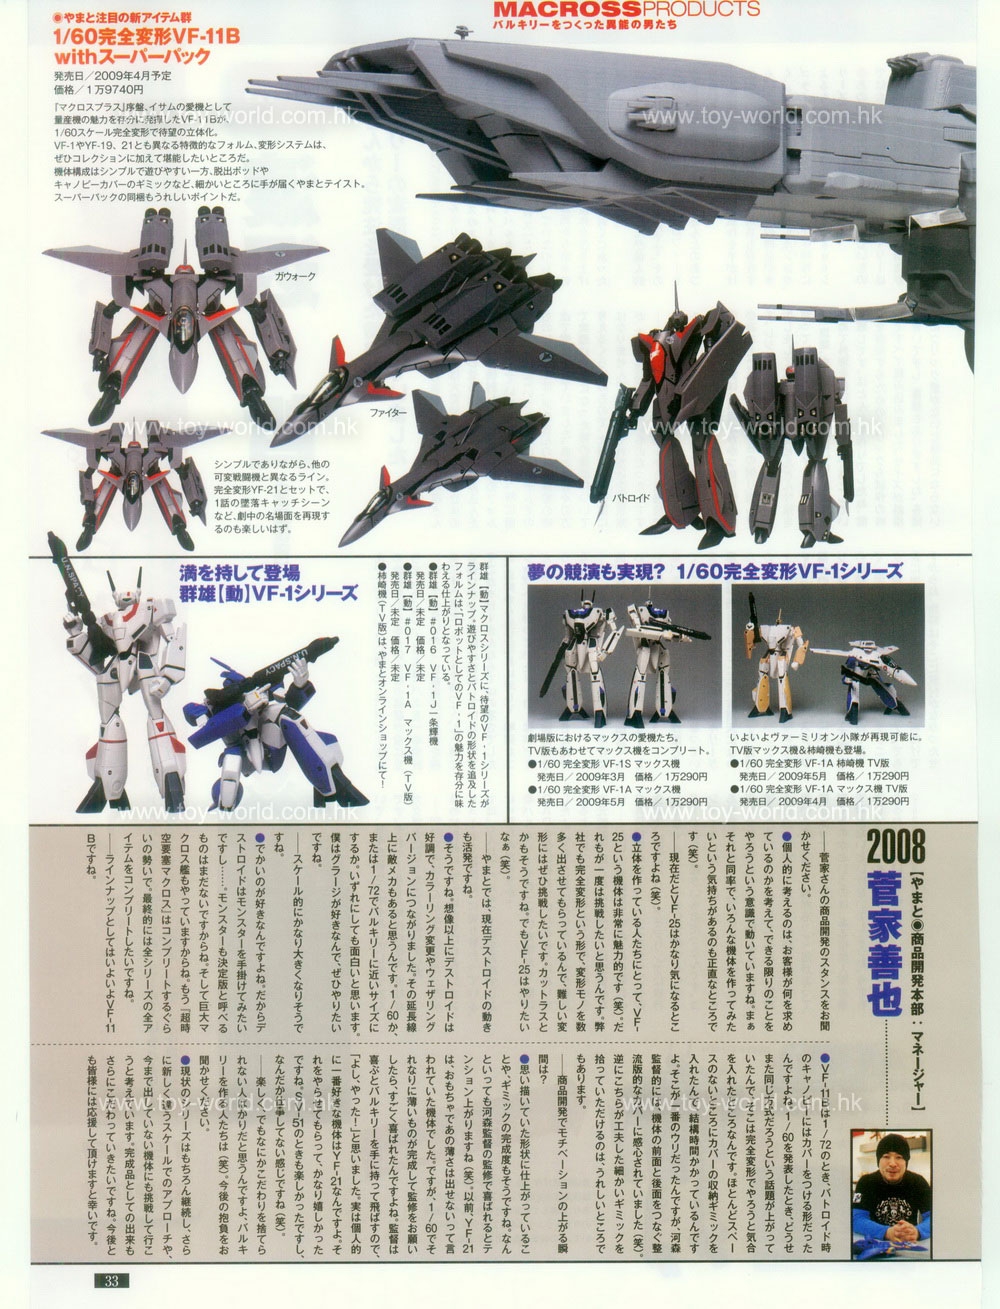 Figure OH No.134 - Special Feature: MACROSS Products 26